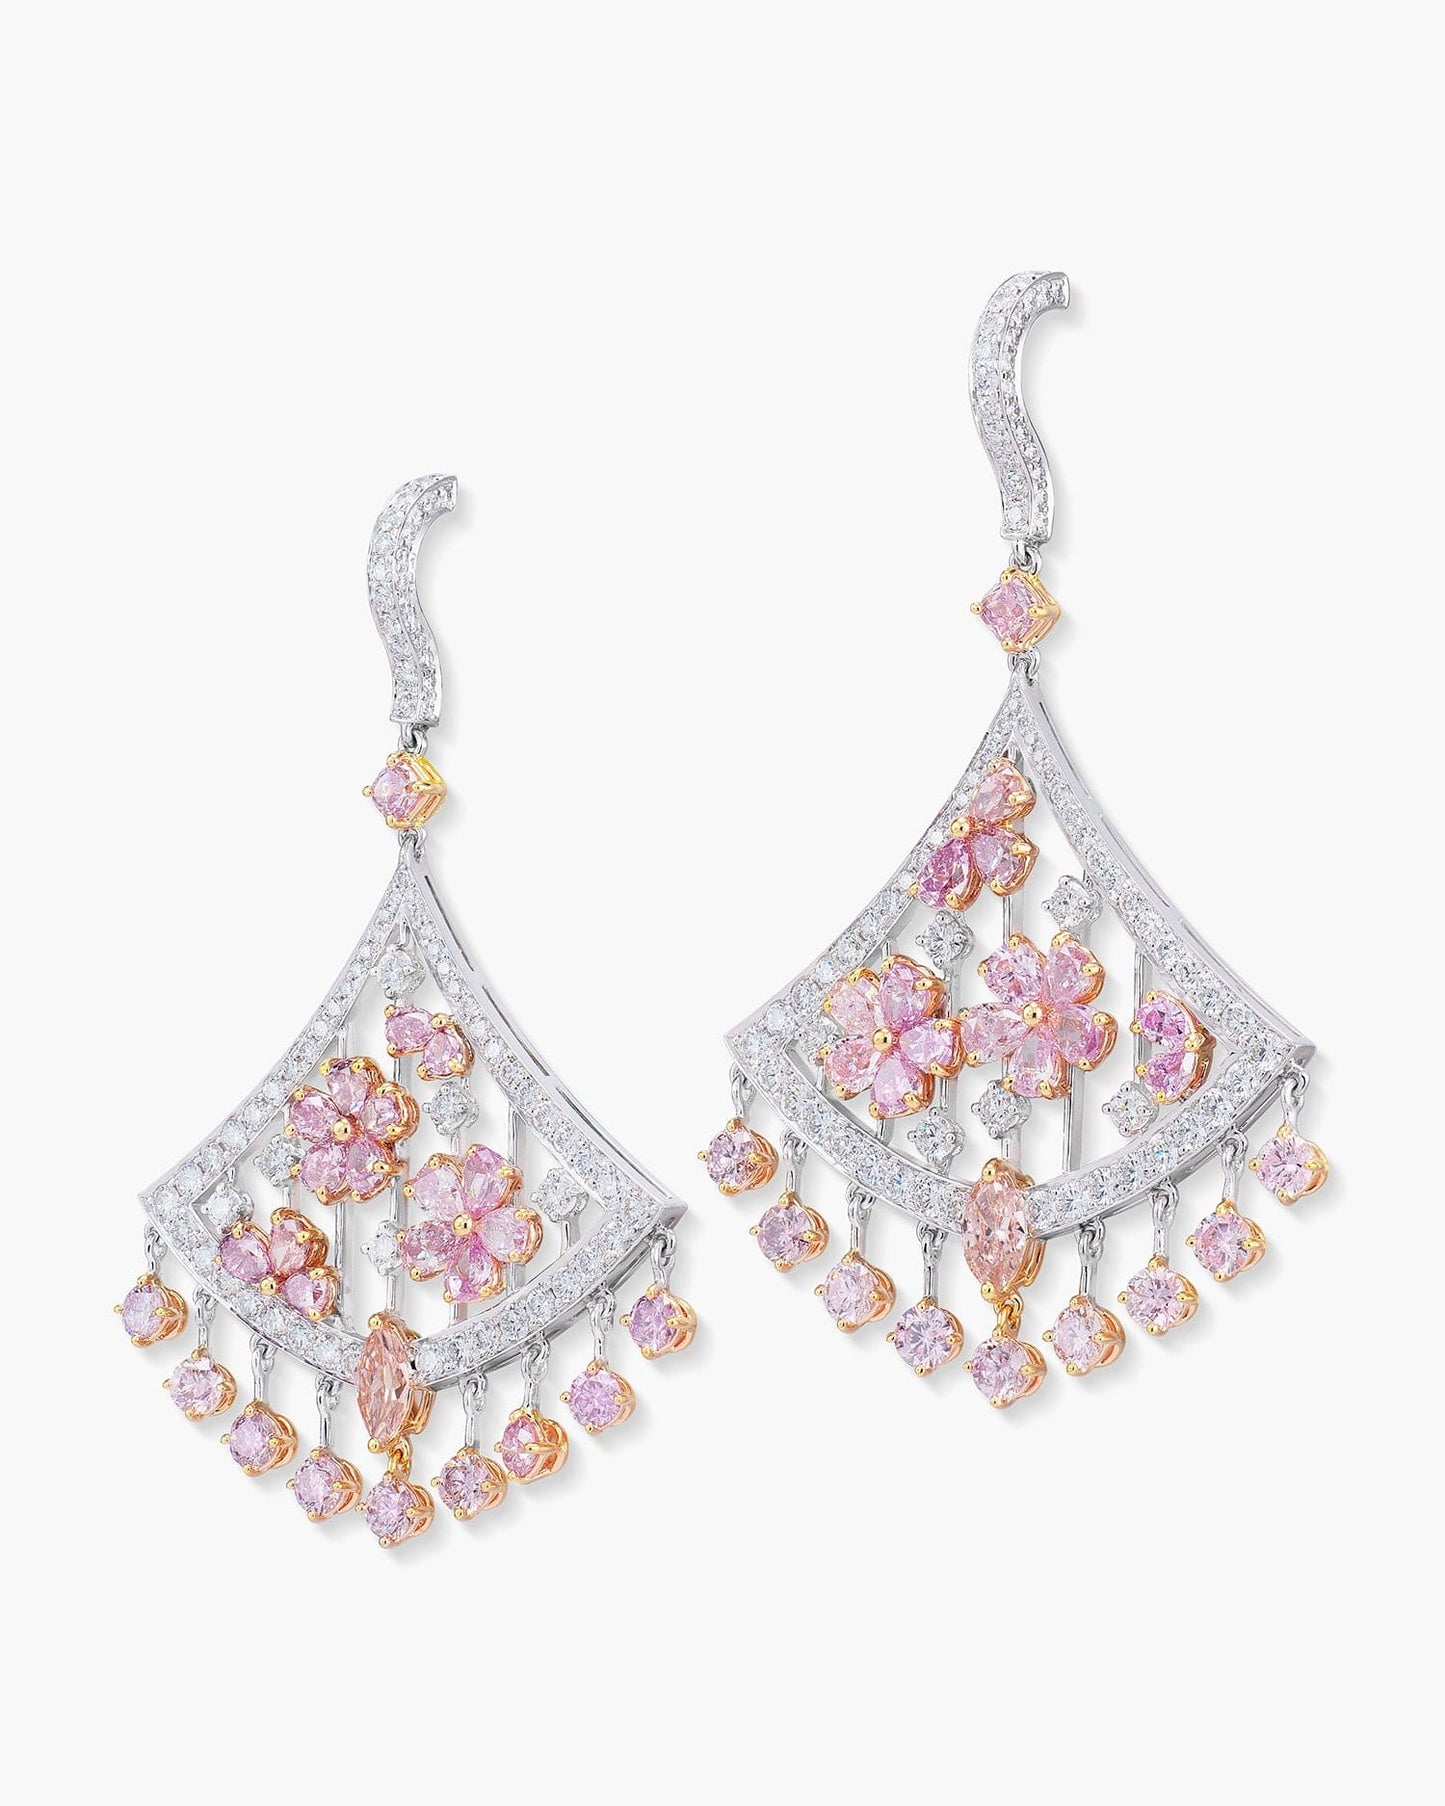 Pink and White Diamond Cherry Blossom Earrings